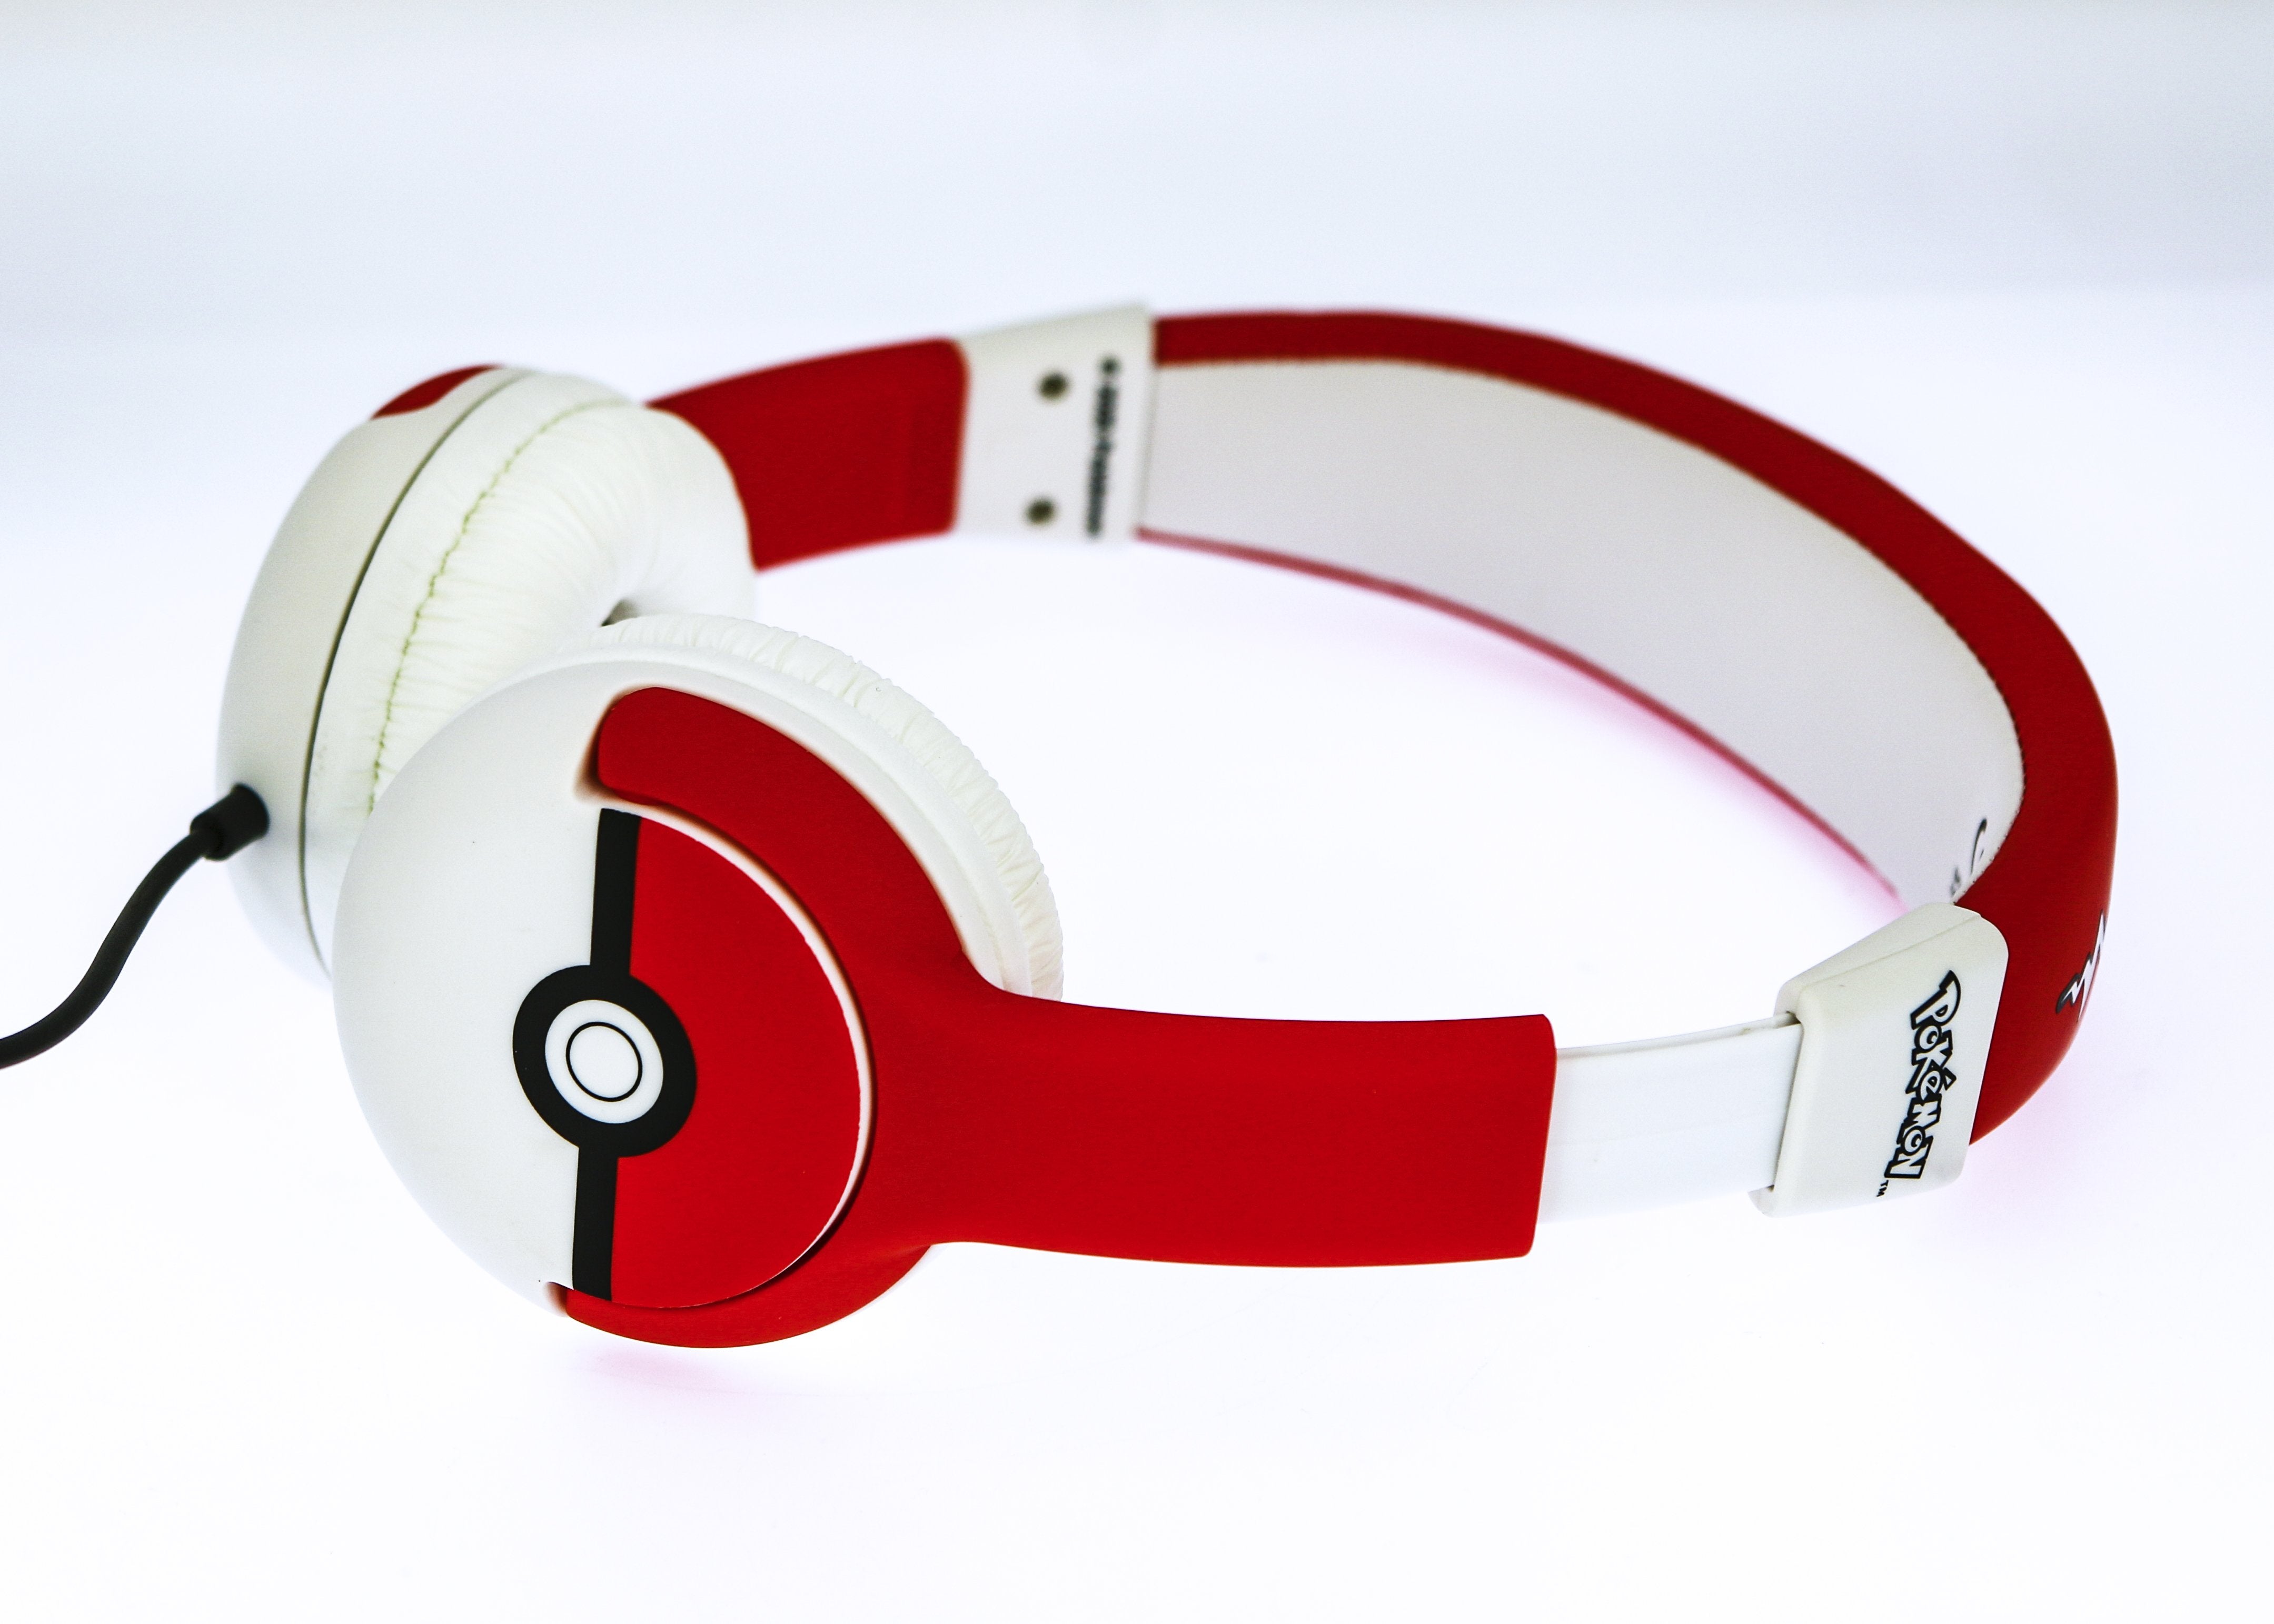 OTL Pokemon OnEar Wired Headphone - Safe Volume Limiting @85dB, Foldable & Adjustable, Superb Sound Quality,  Works w/ Smartphones, Tablets, Ninetendo Switch, Laptops & devices w/ 3.5mm port - PokeBall